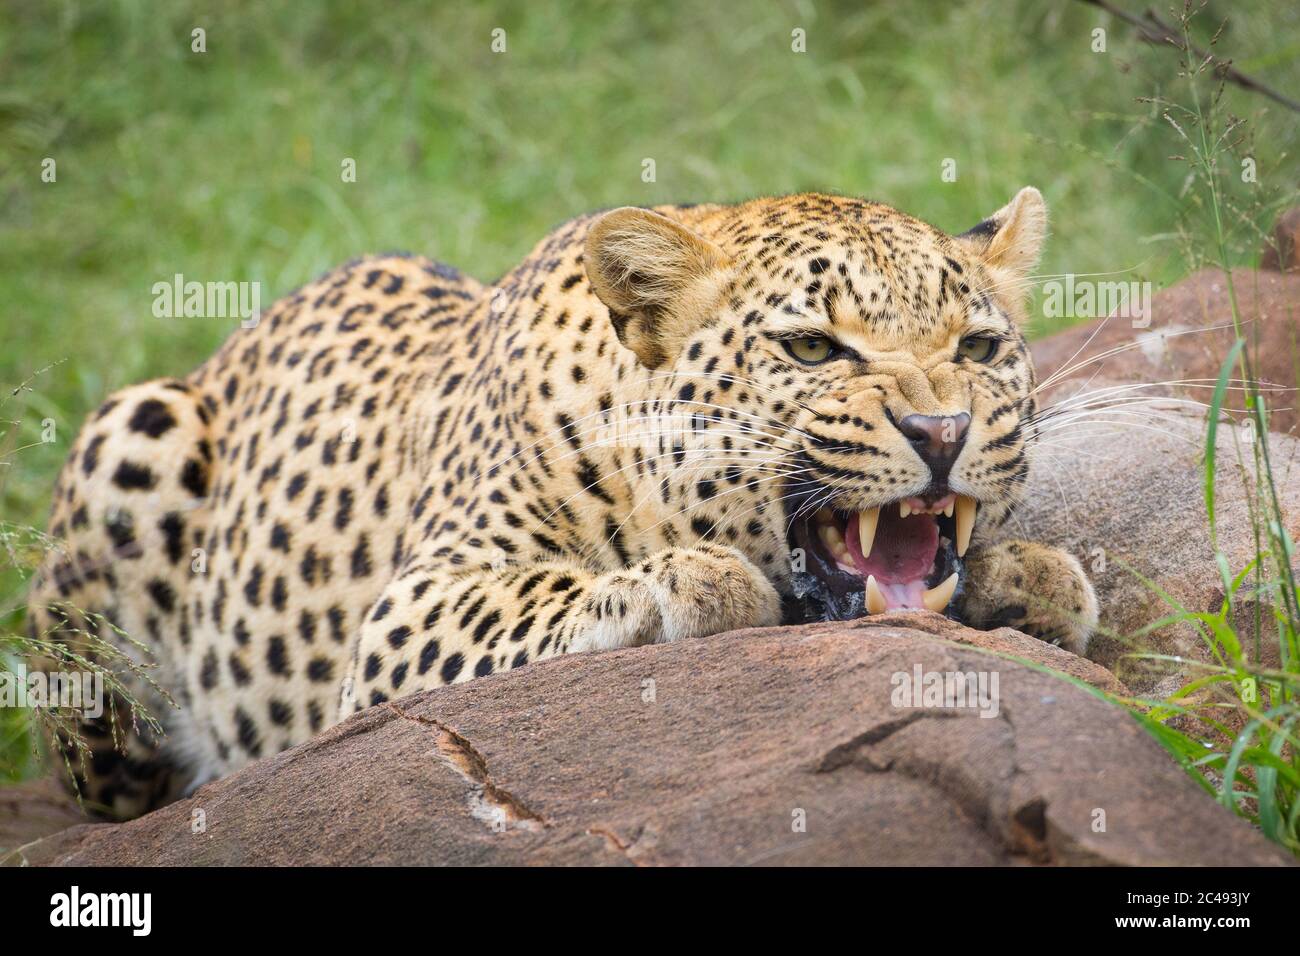 An adult male leopard showing aggression by snarling and crouching by a big boulder in Kruger Park South Africa Stock Photo